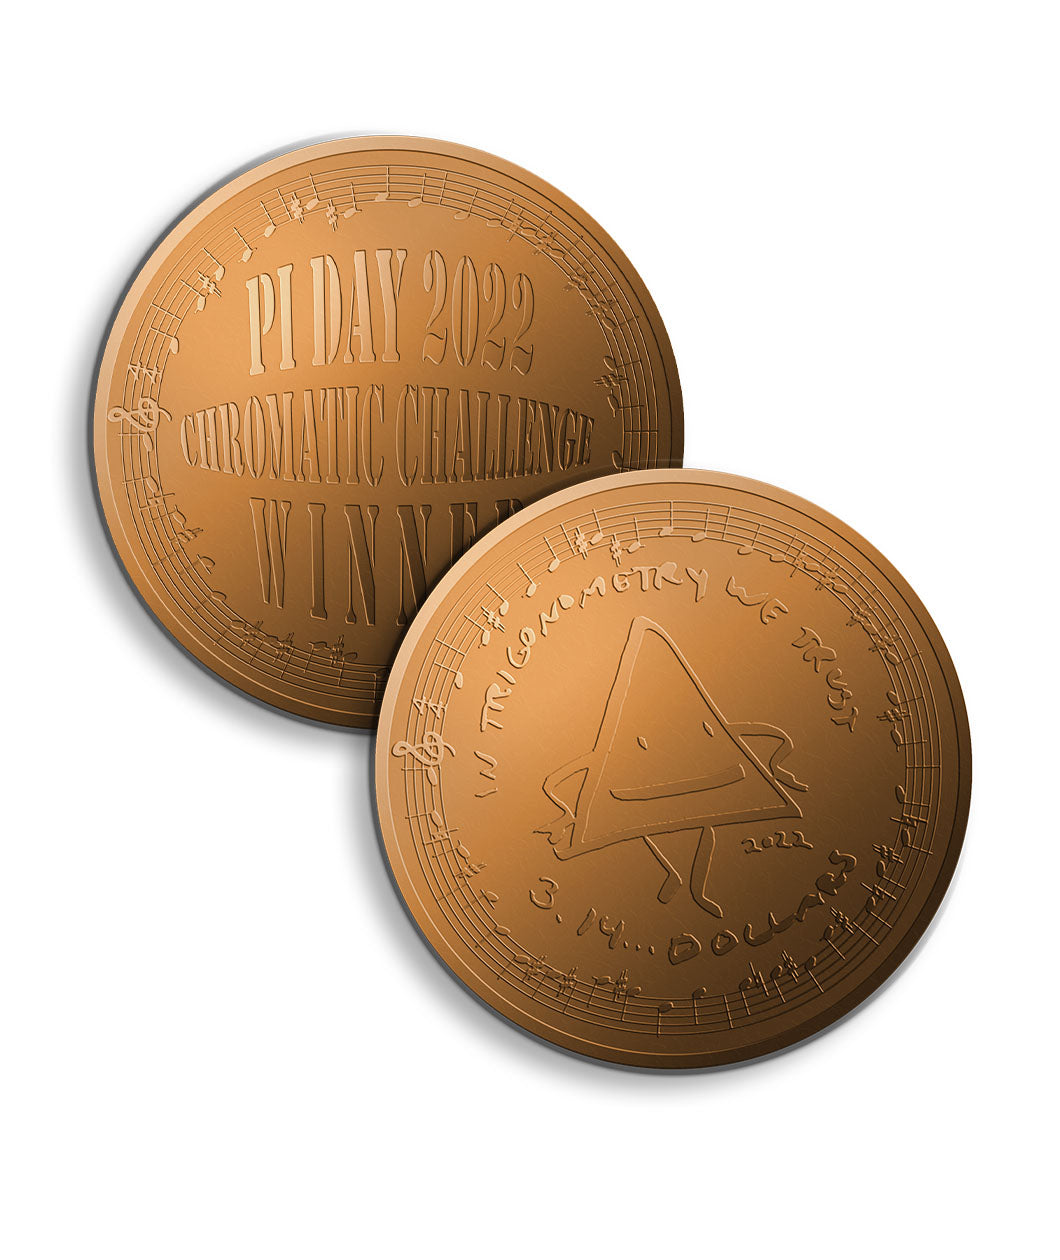 Front and back of Pi Day 2022 bronze coin. Front: A cartoon drawing of a triangle. 